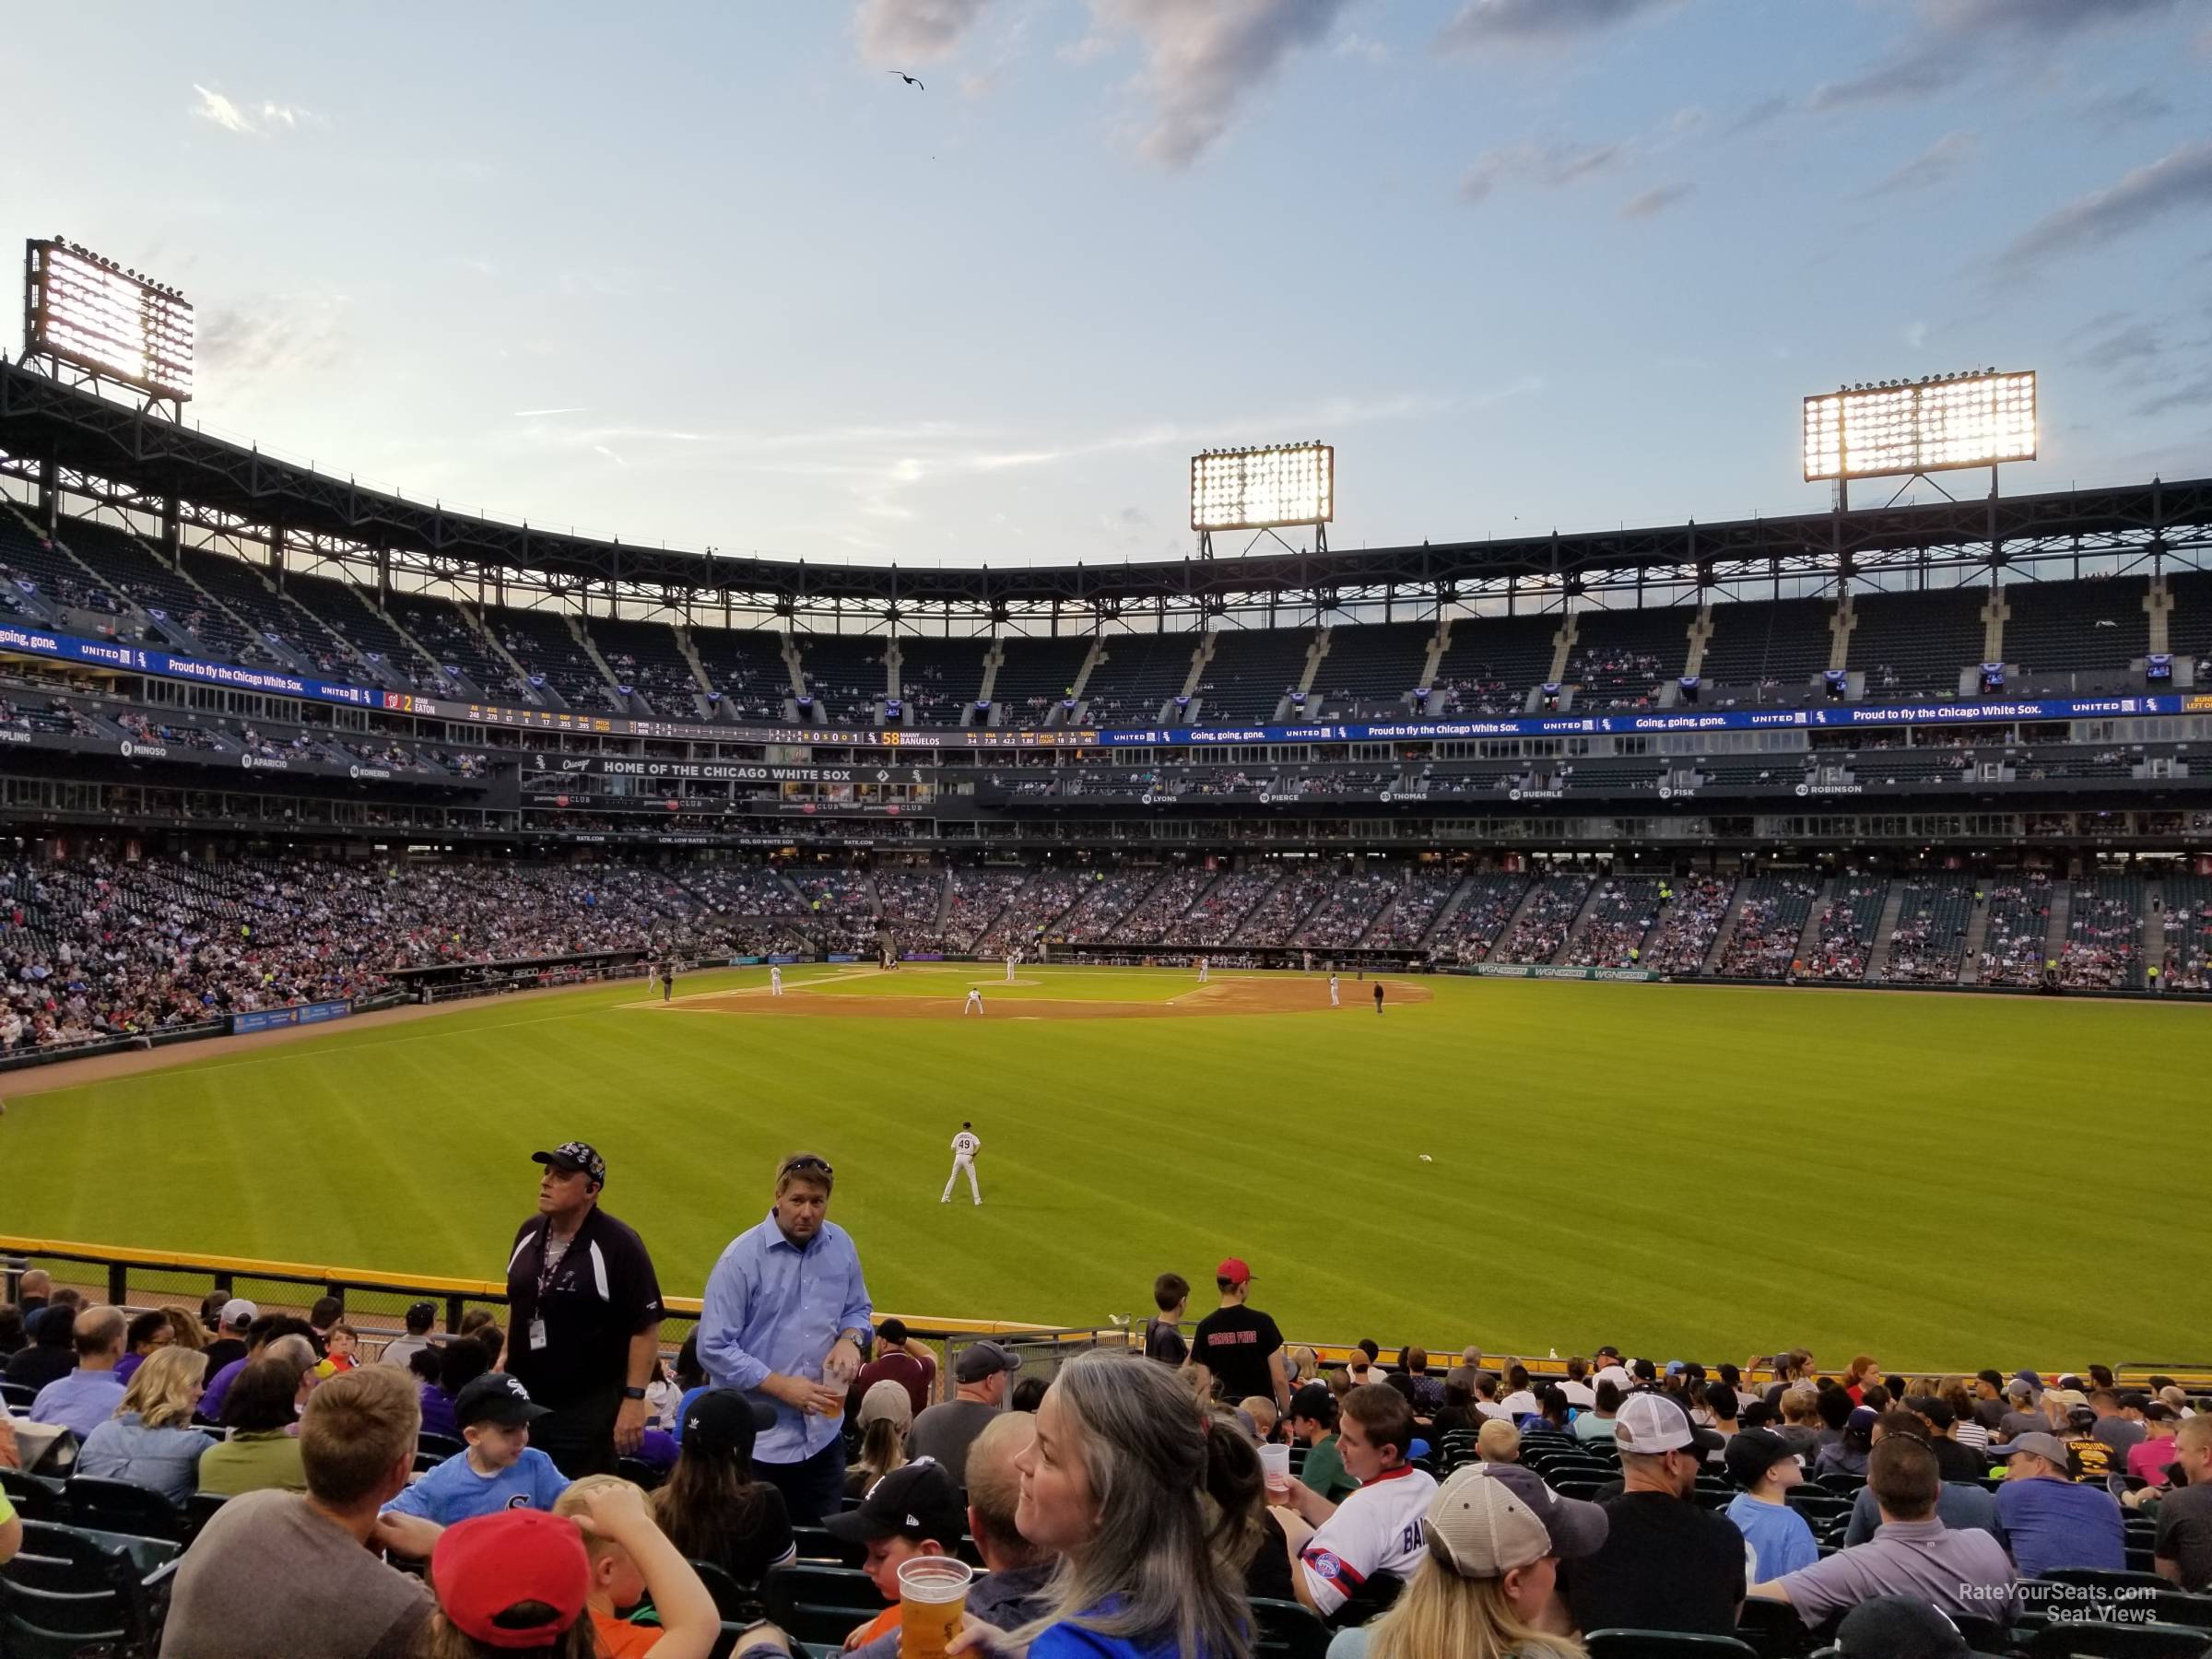 section 103, row 23 seat view  - guaranteed rate field